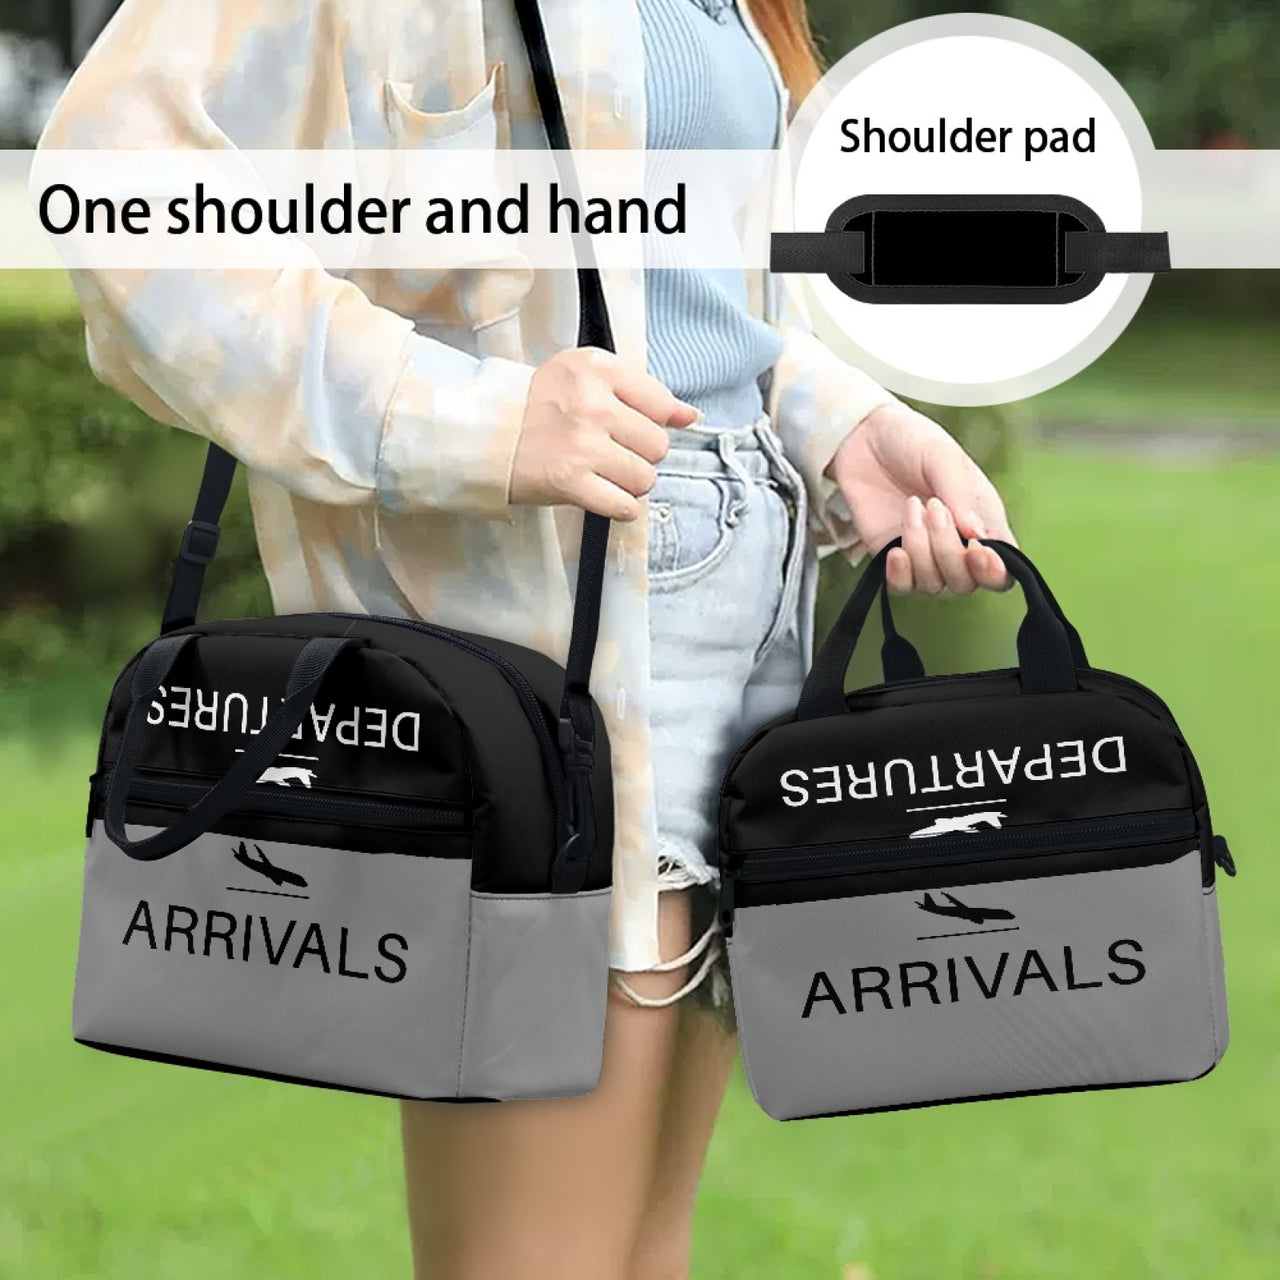 Arrival & Departures(Gray) Designed Lunch Bags